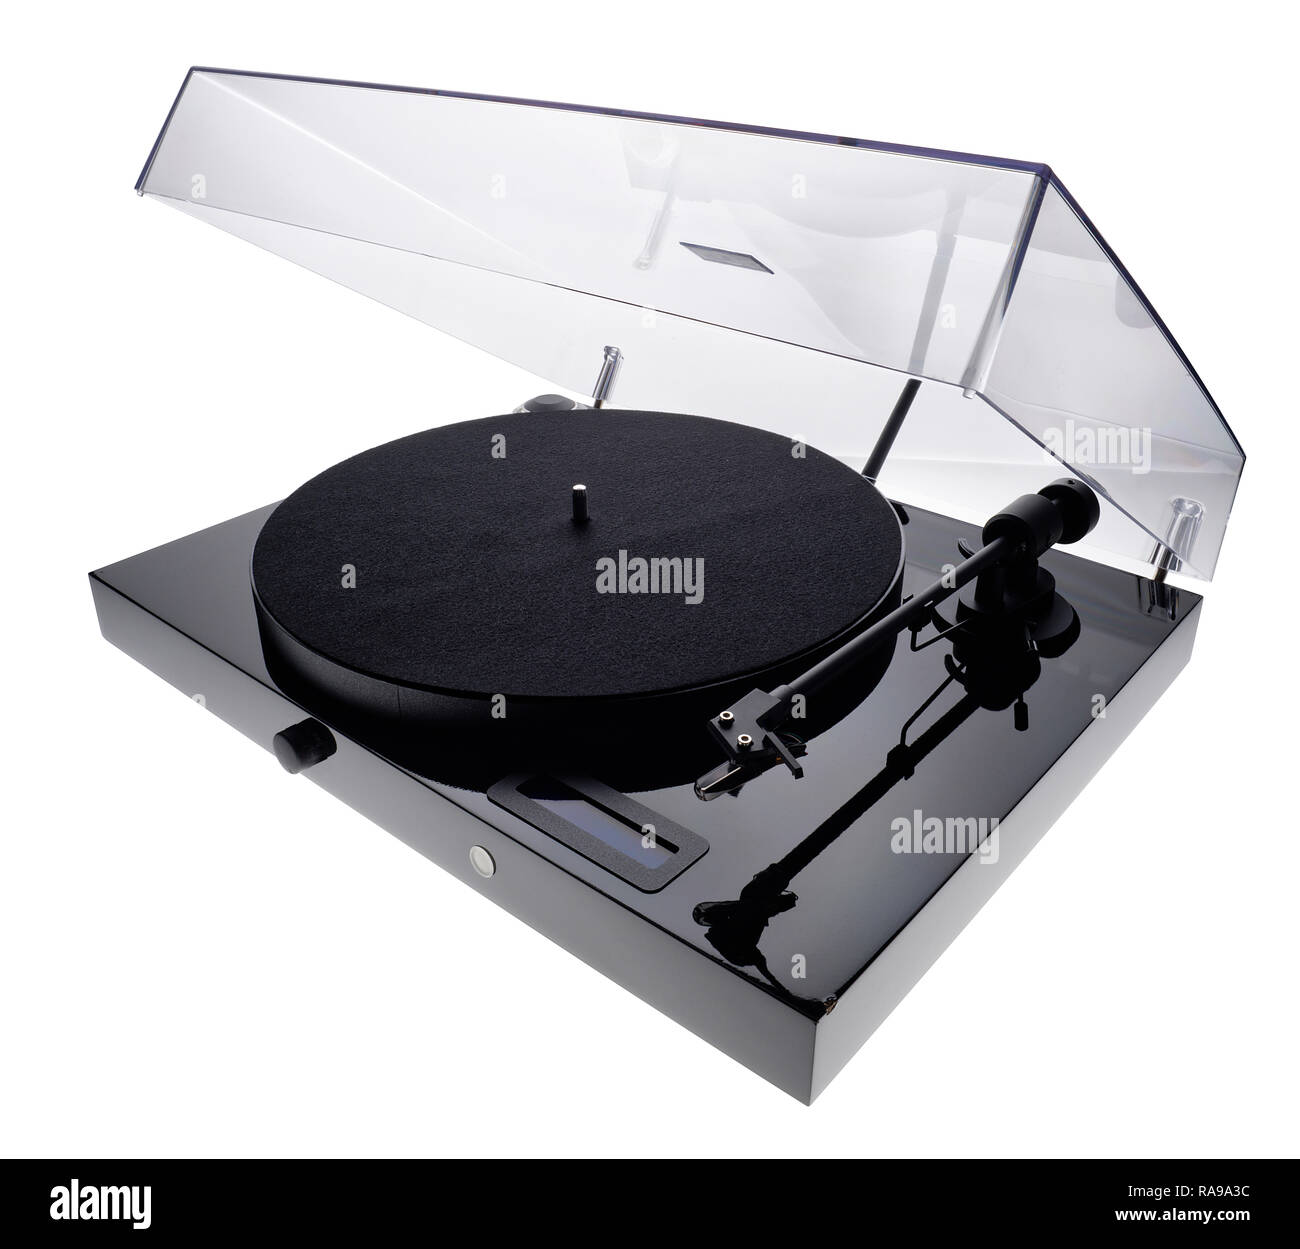 Record player or turntable. Stock Photo